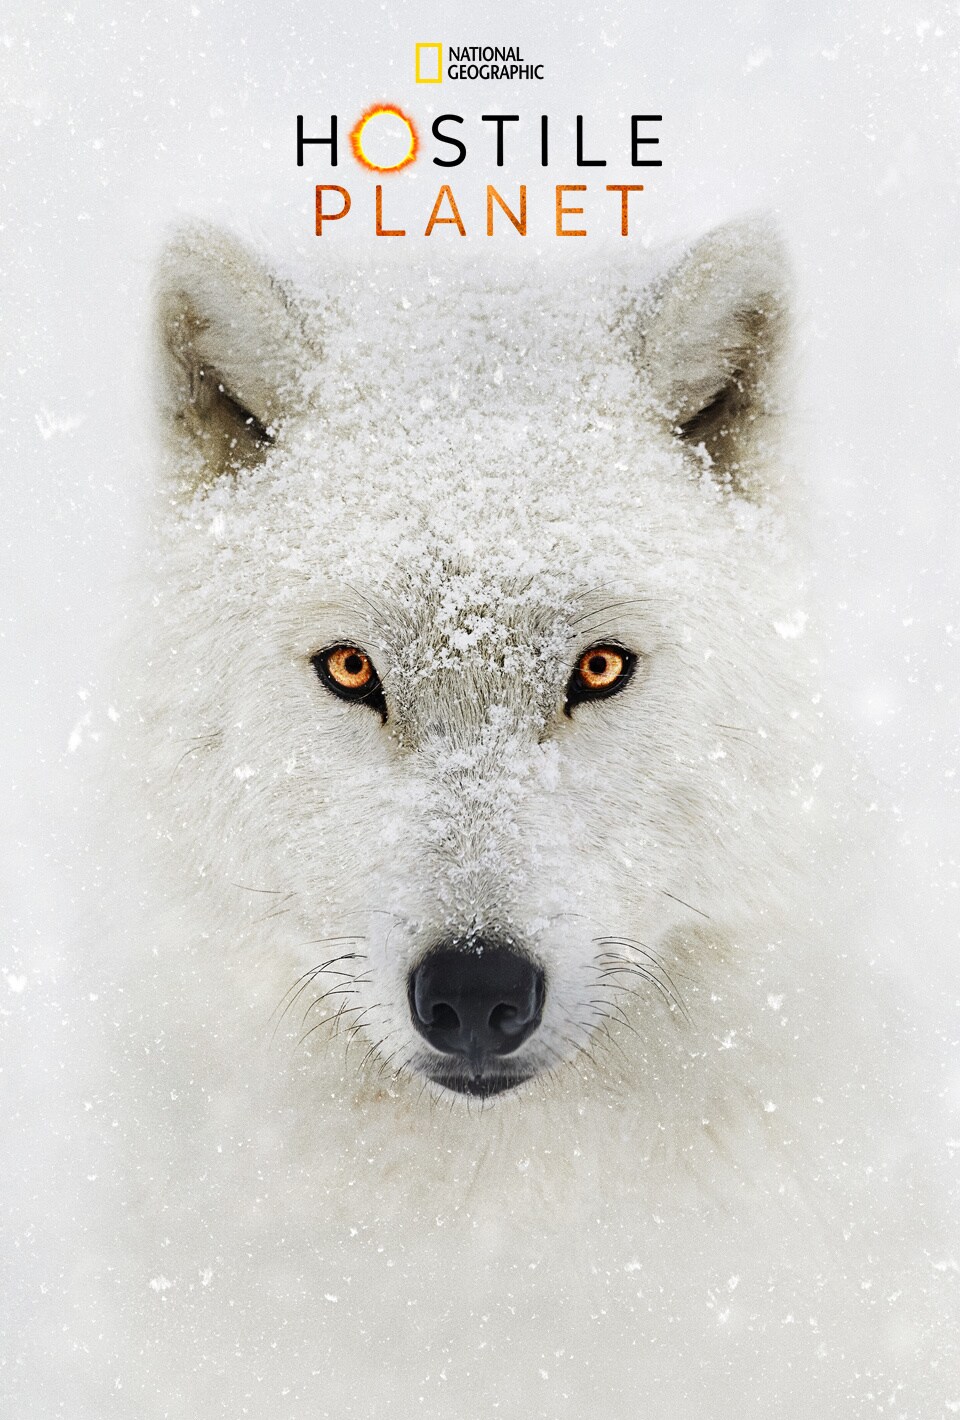 An Arctic Wolf from Hostile Planet with Bear Grylls